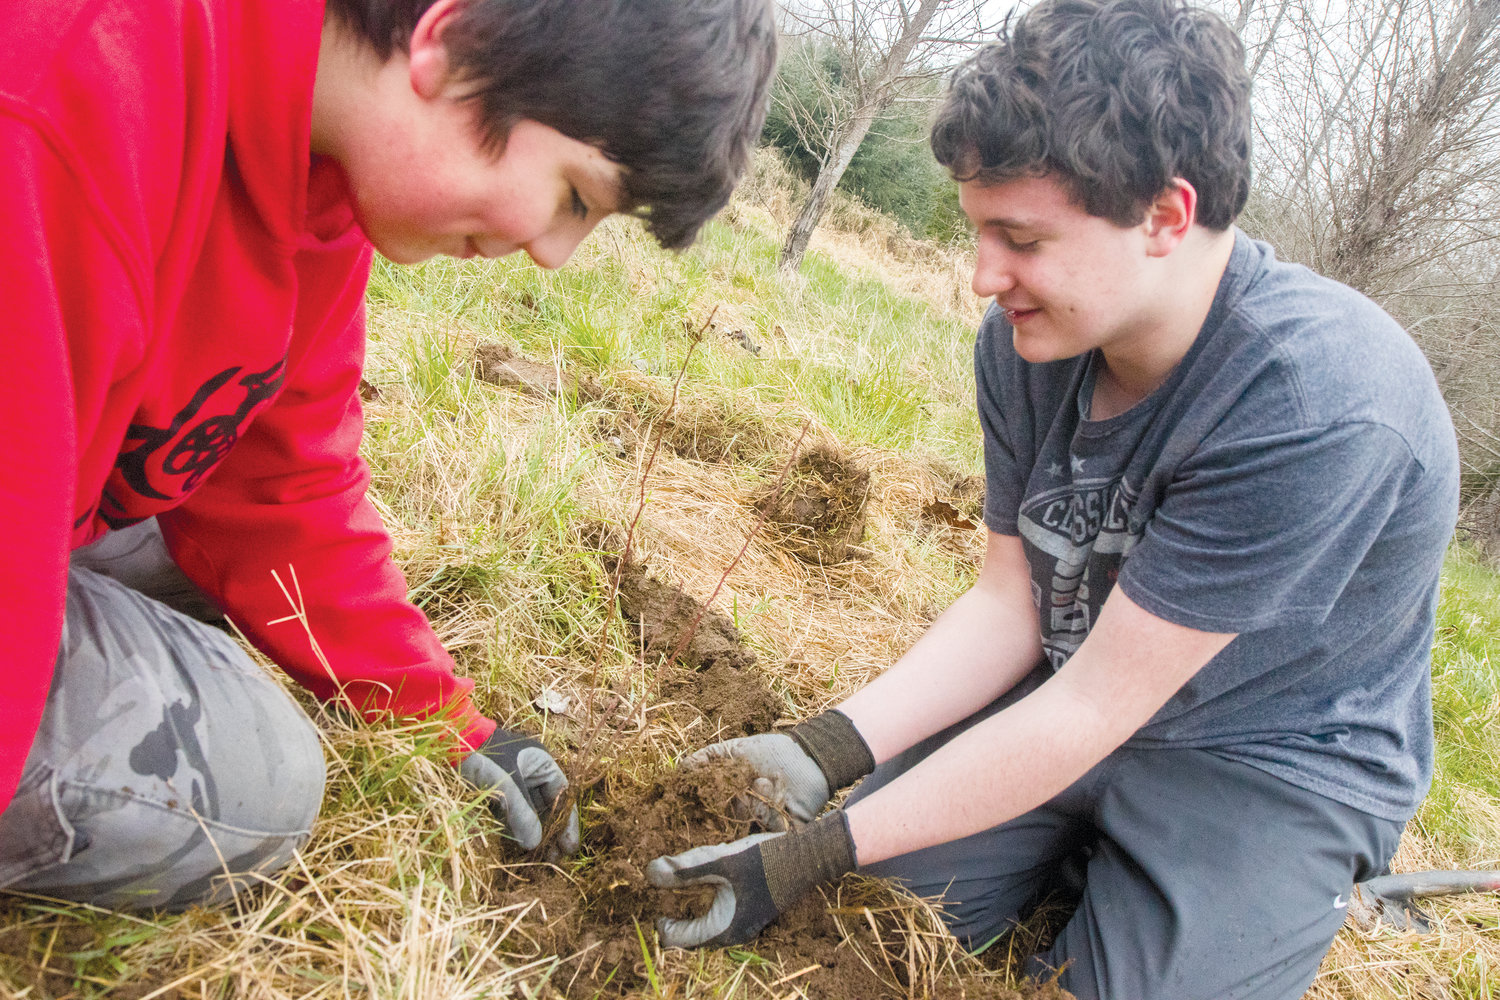 James Wagamon, left, and Callen Johnson spread soil over a newly planted nootka rose.